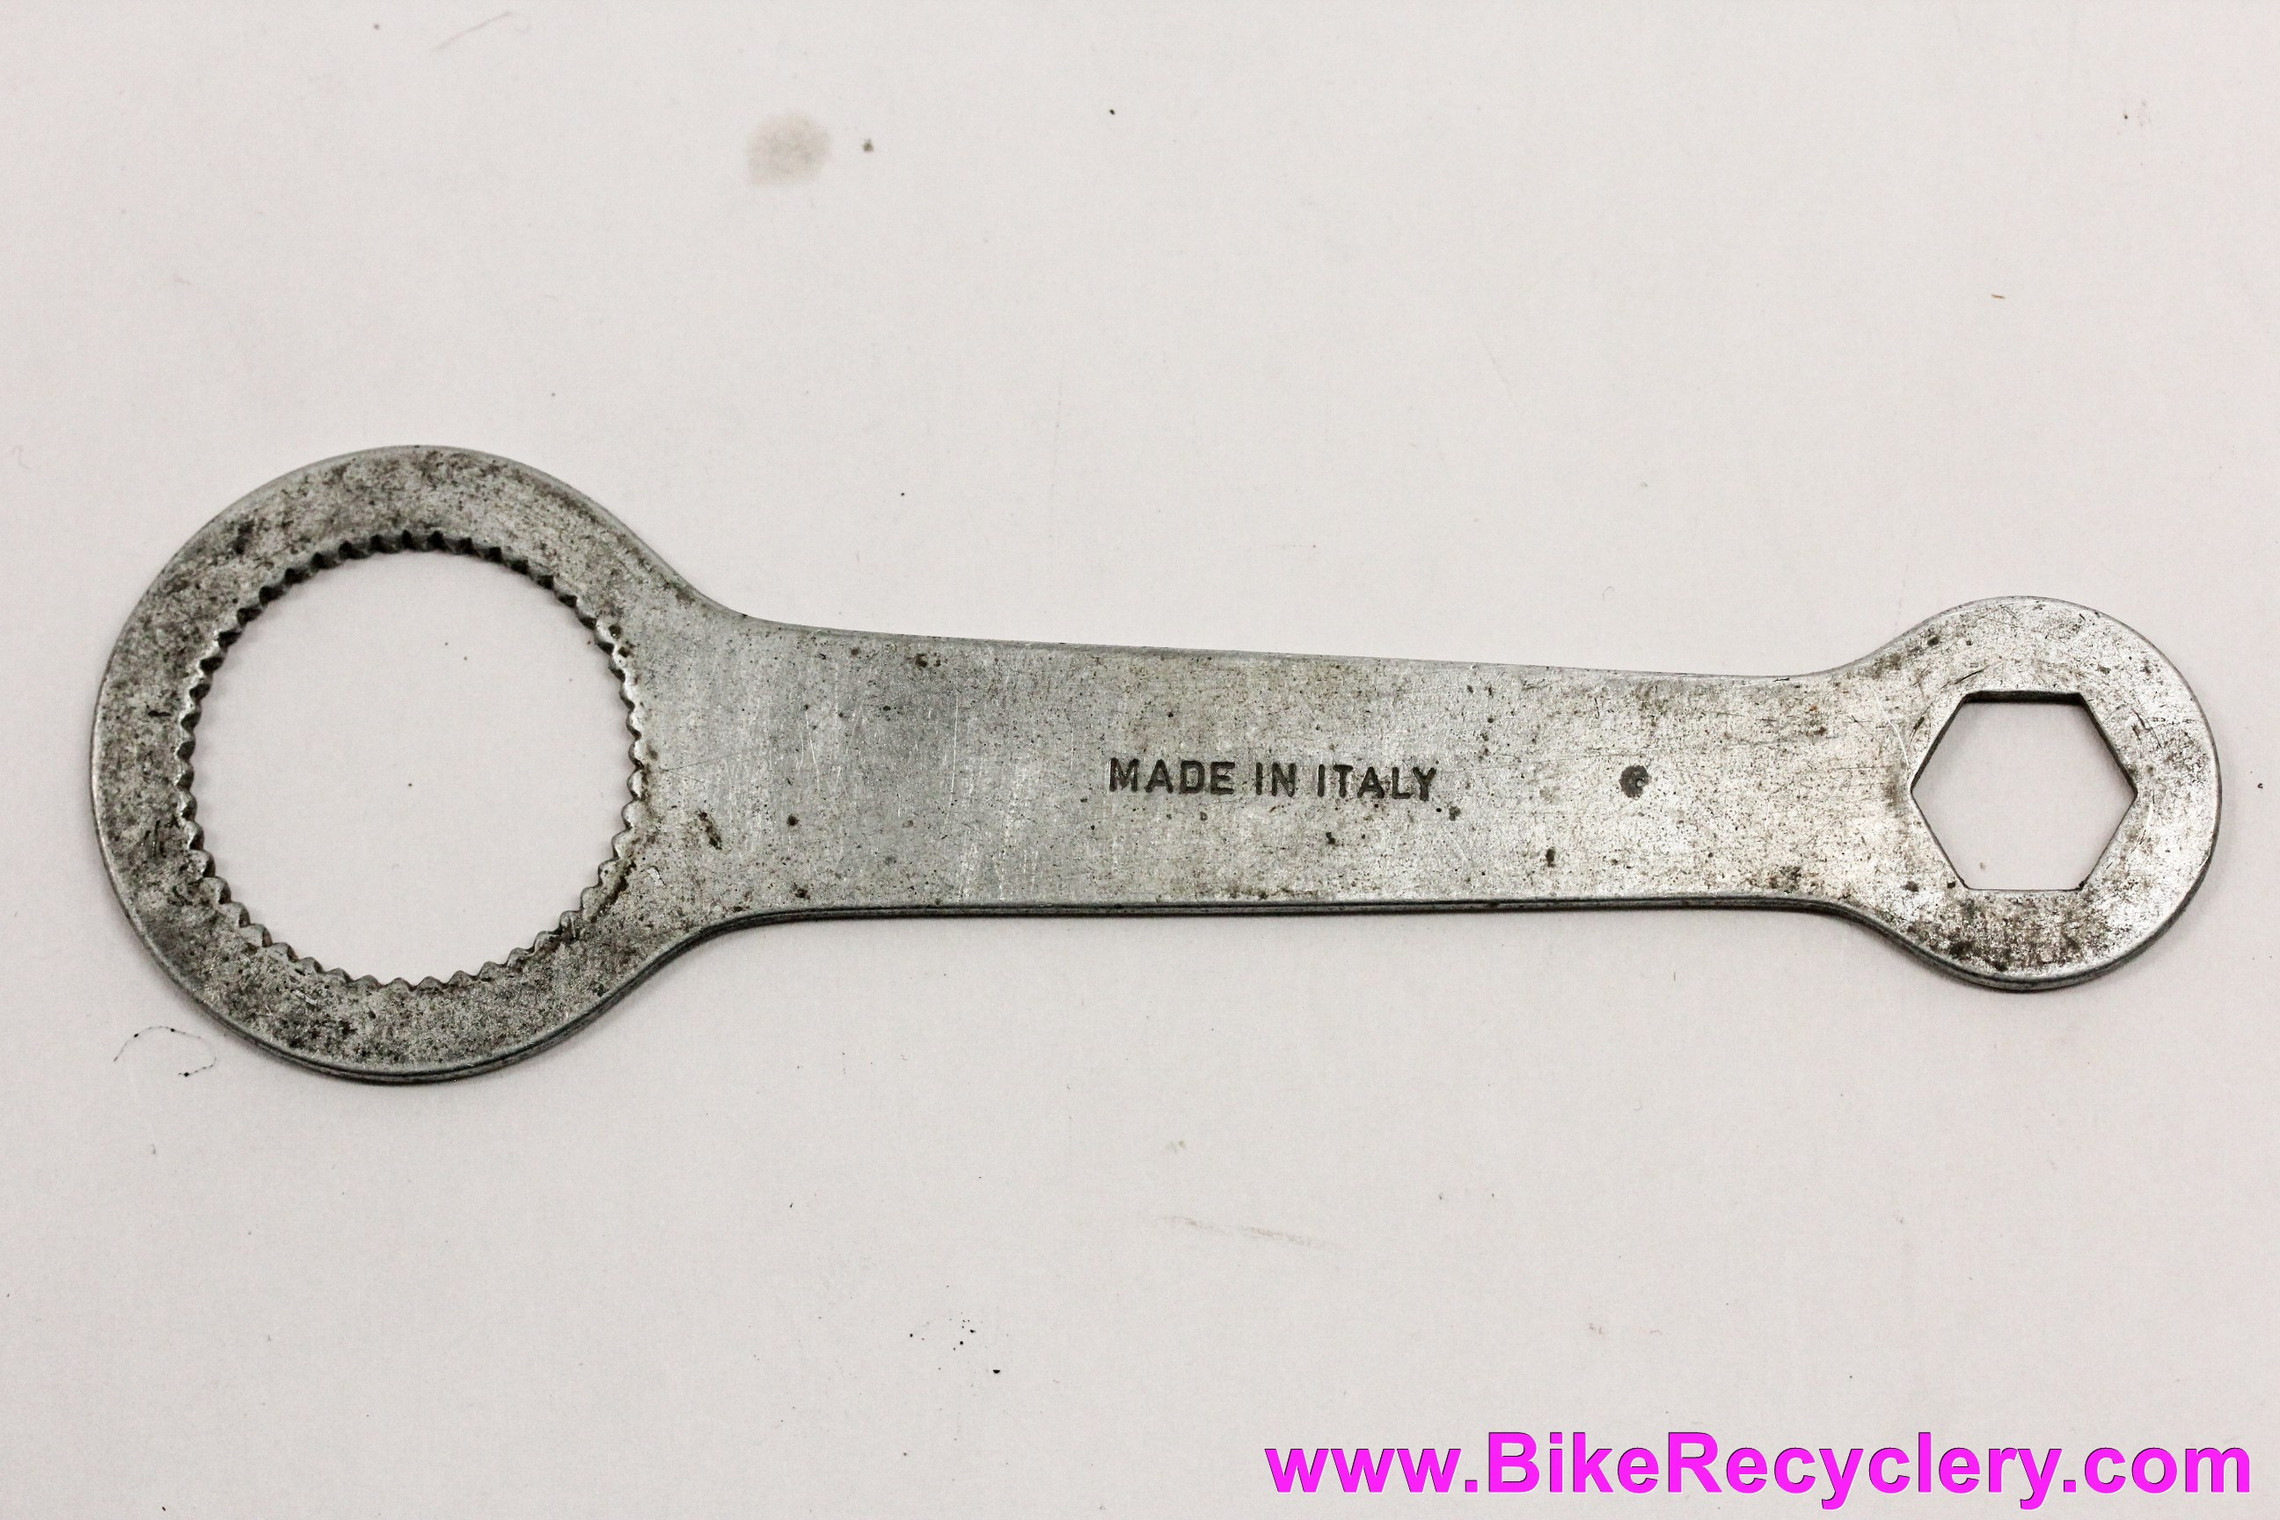 Campagnolo Pedal Dust Cap Wrench: #710 - Splined Tool